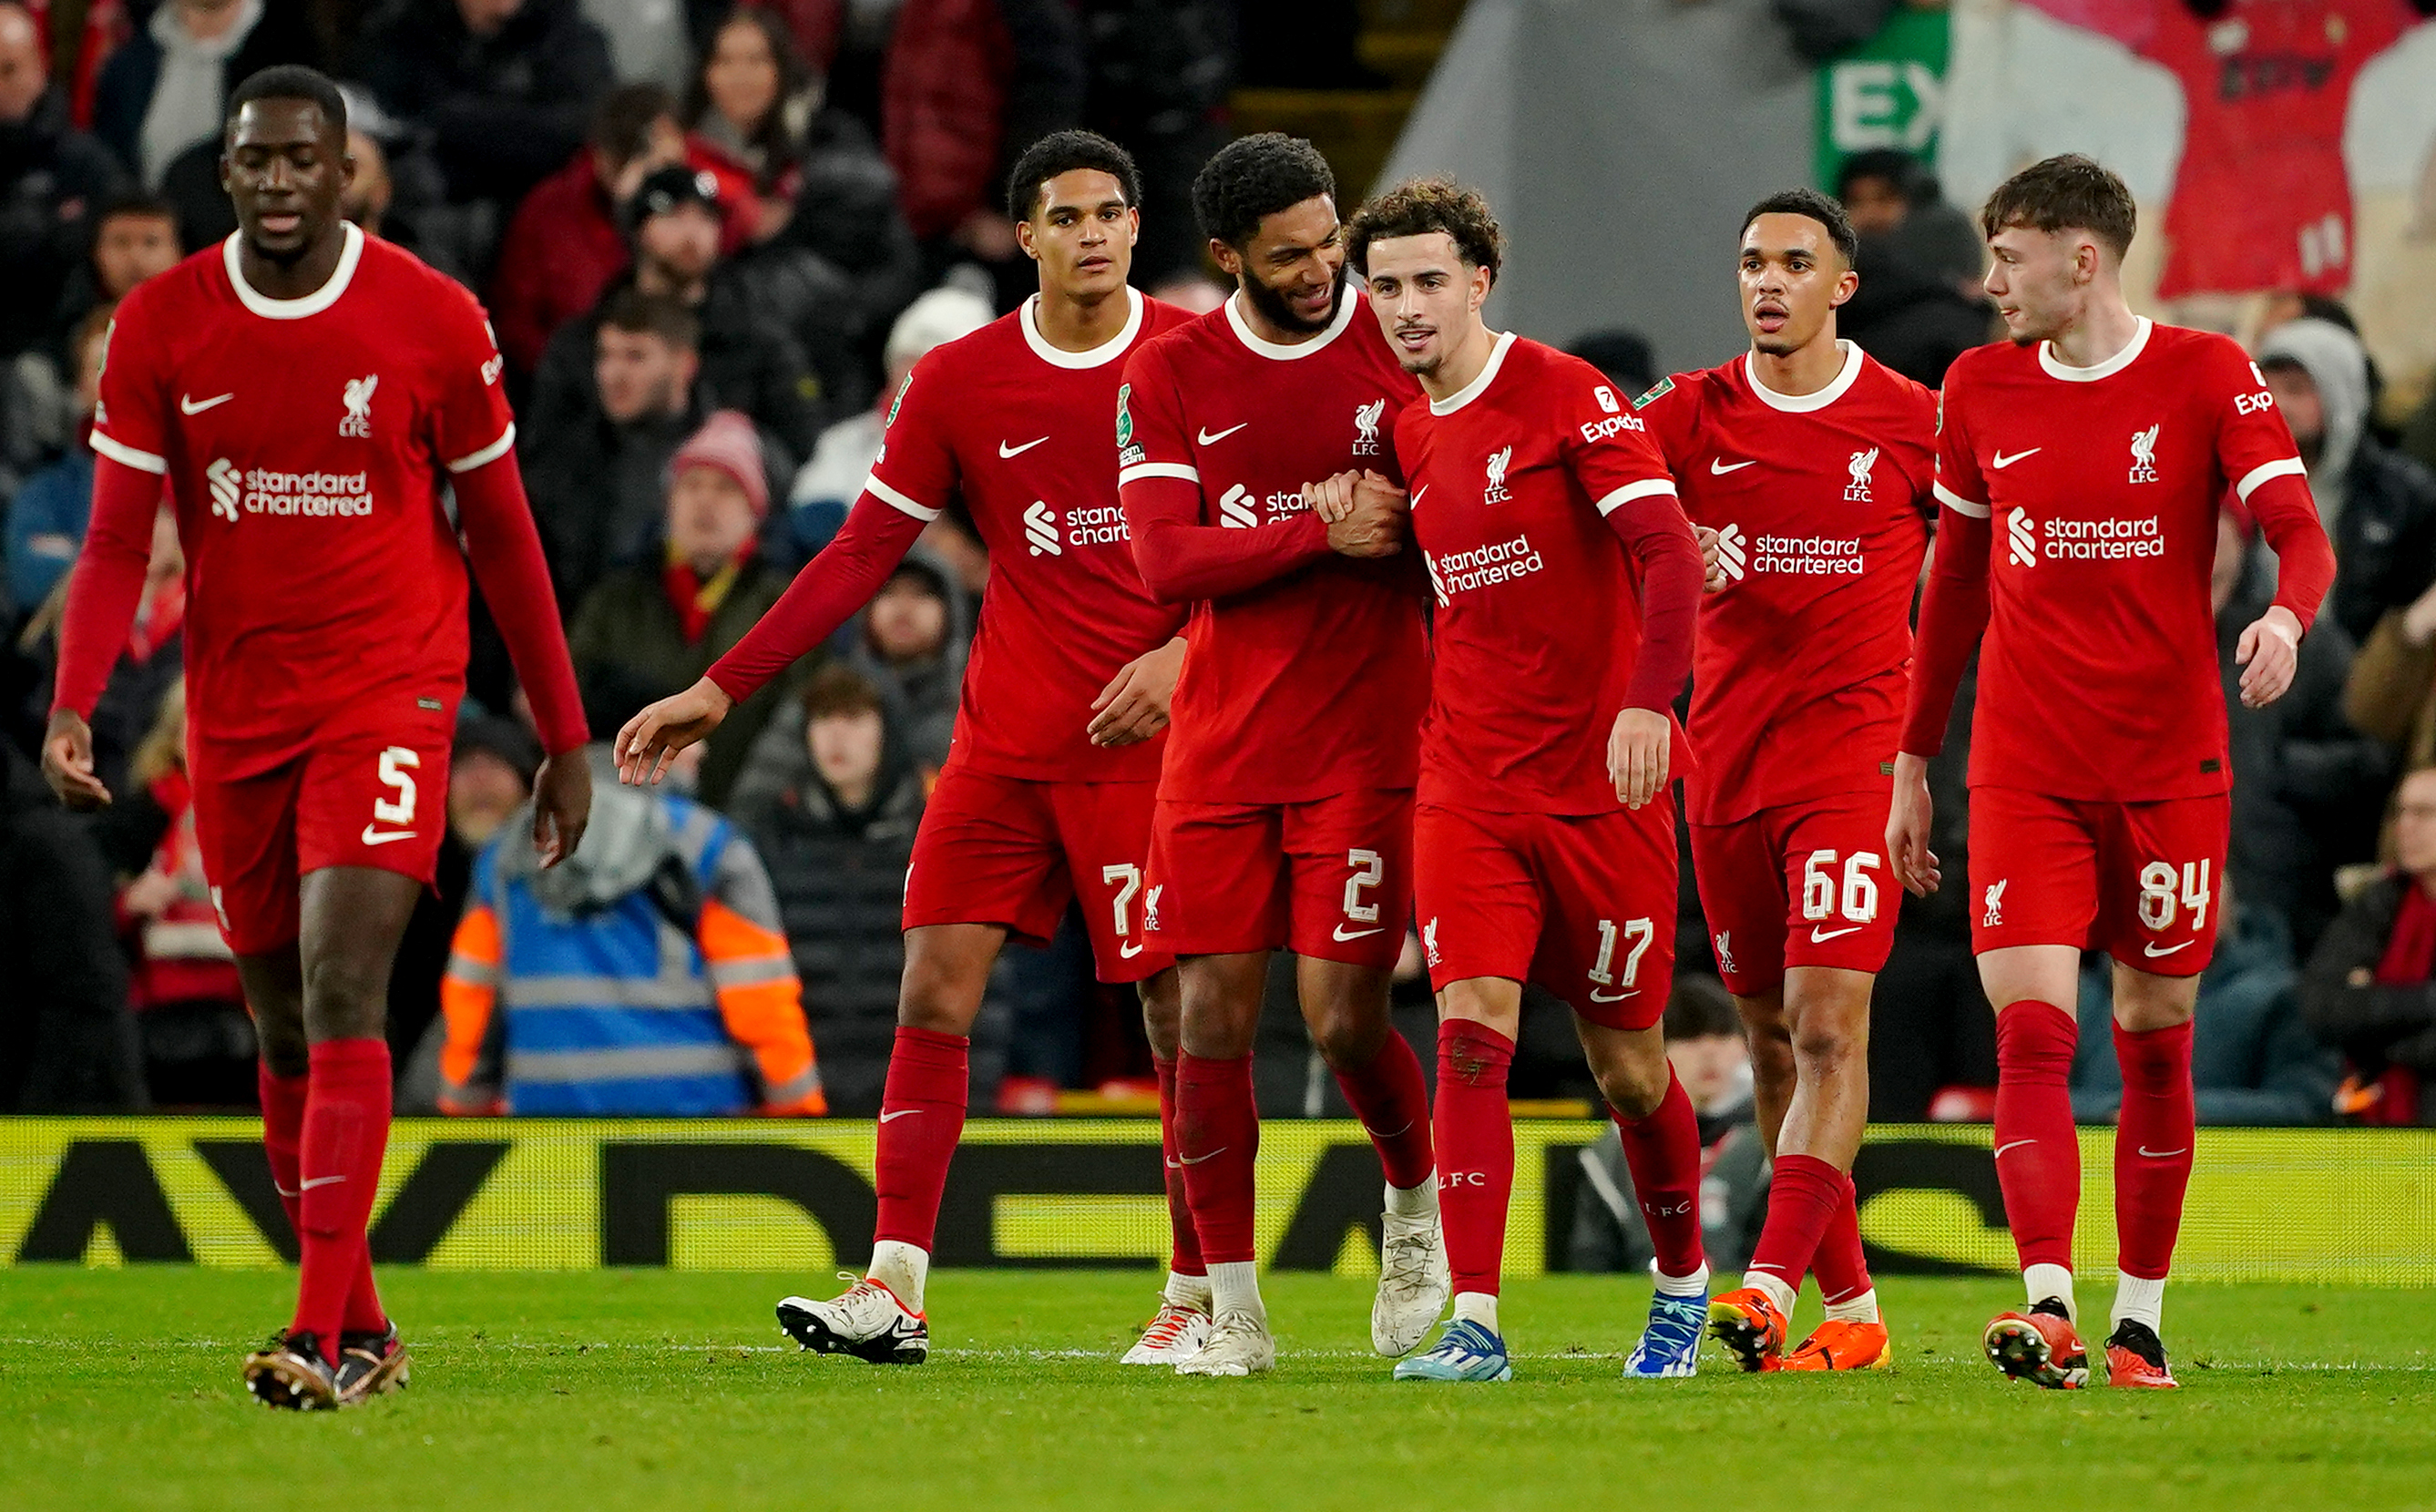 Liverpool eased past West Ham